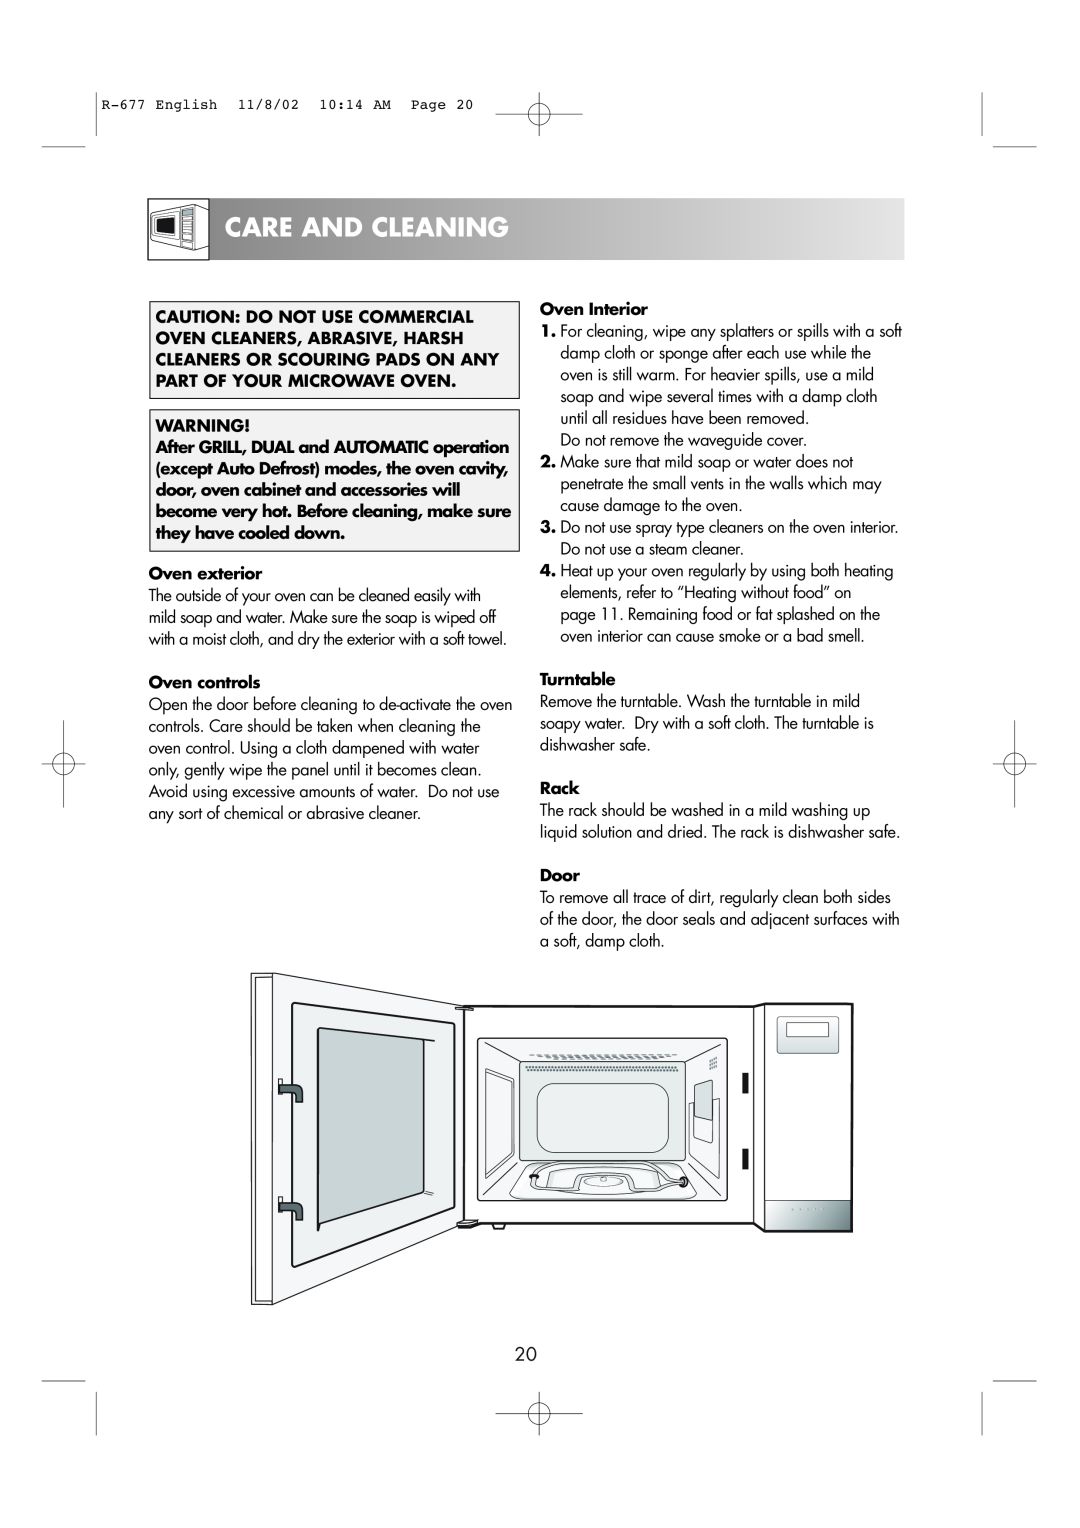 Sharp R-677F operation manual Care And Cleaning, Oven exterior, Oven controls, Oven Interior, Turntable, Rack, Door 